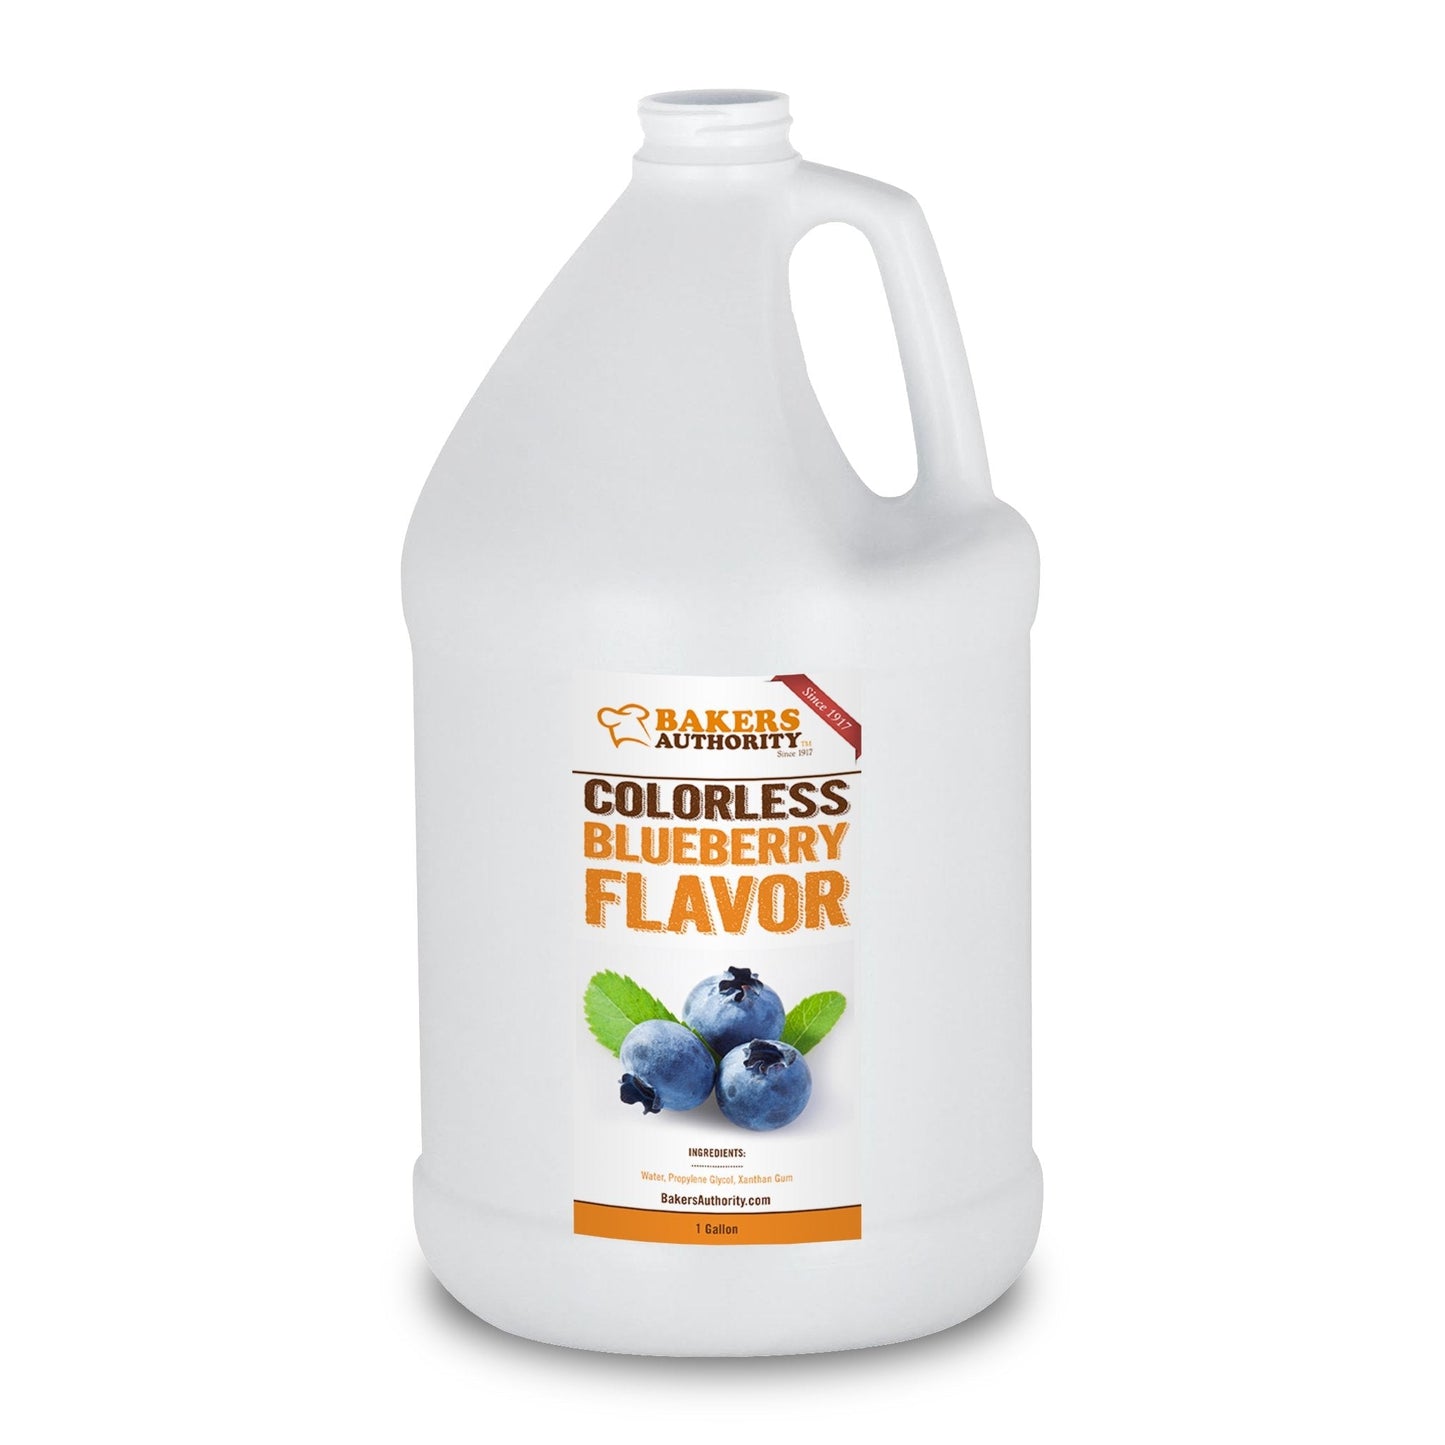 Artificial Blueberry Flavor - Colorless